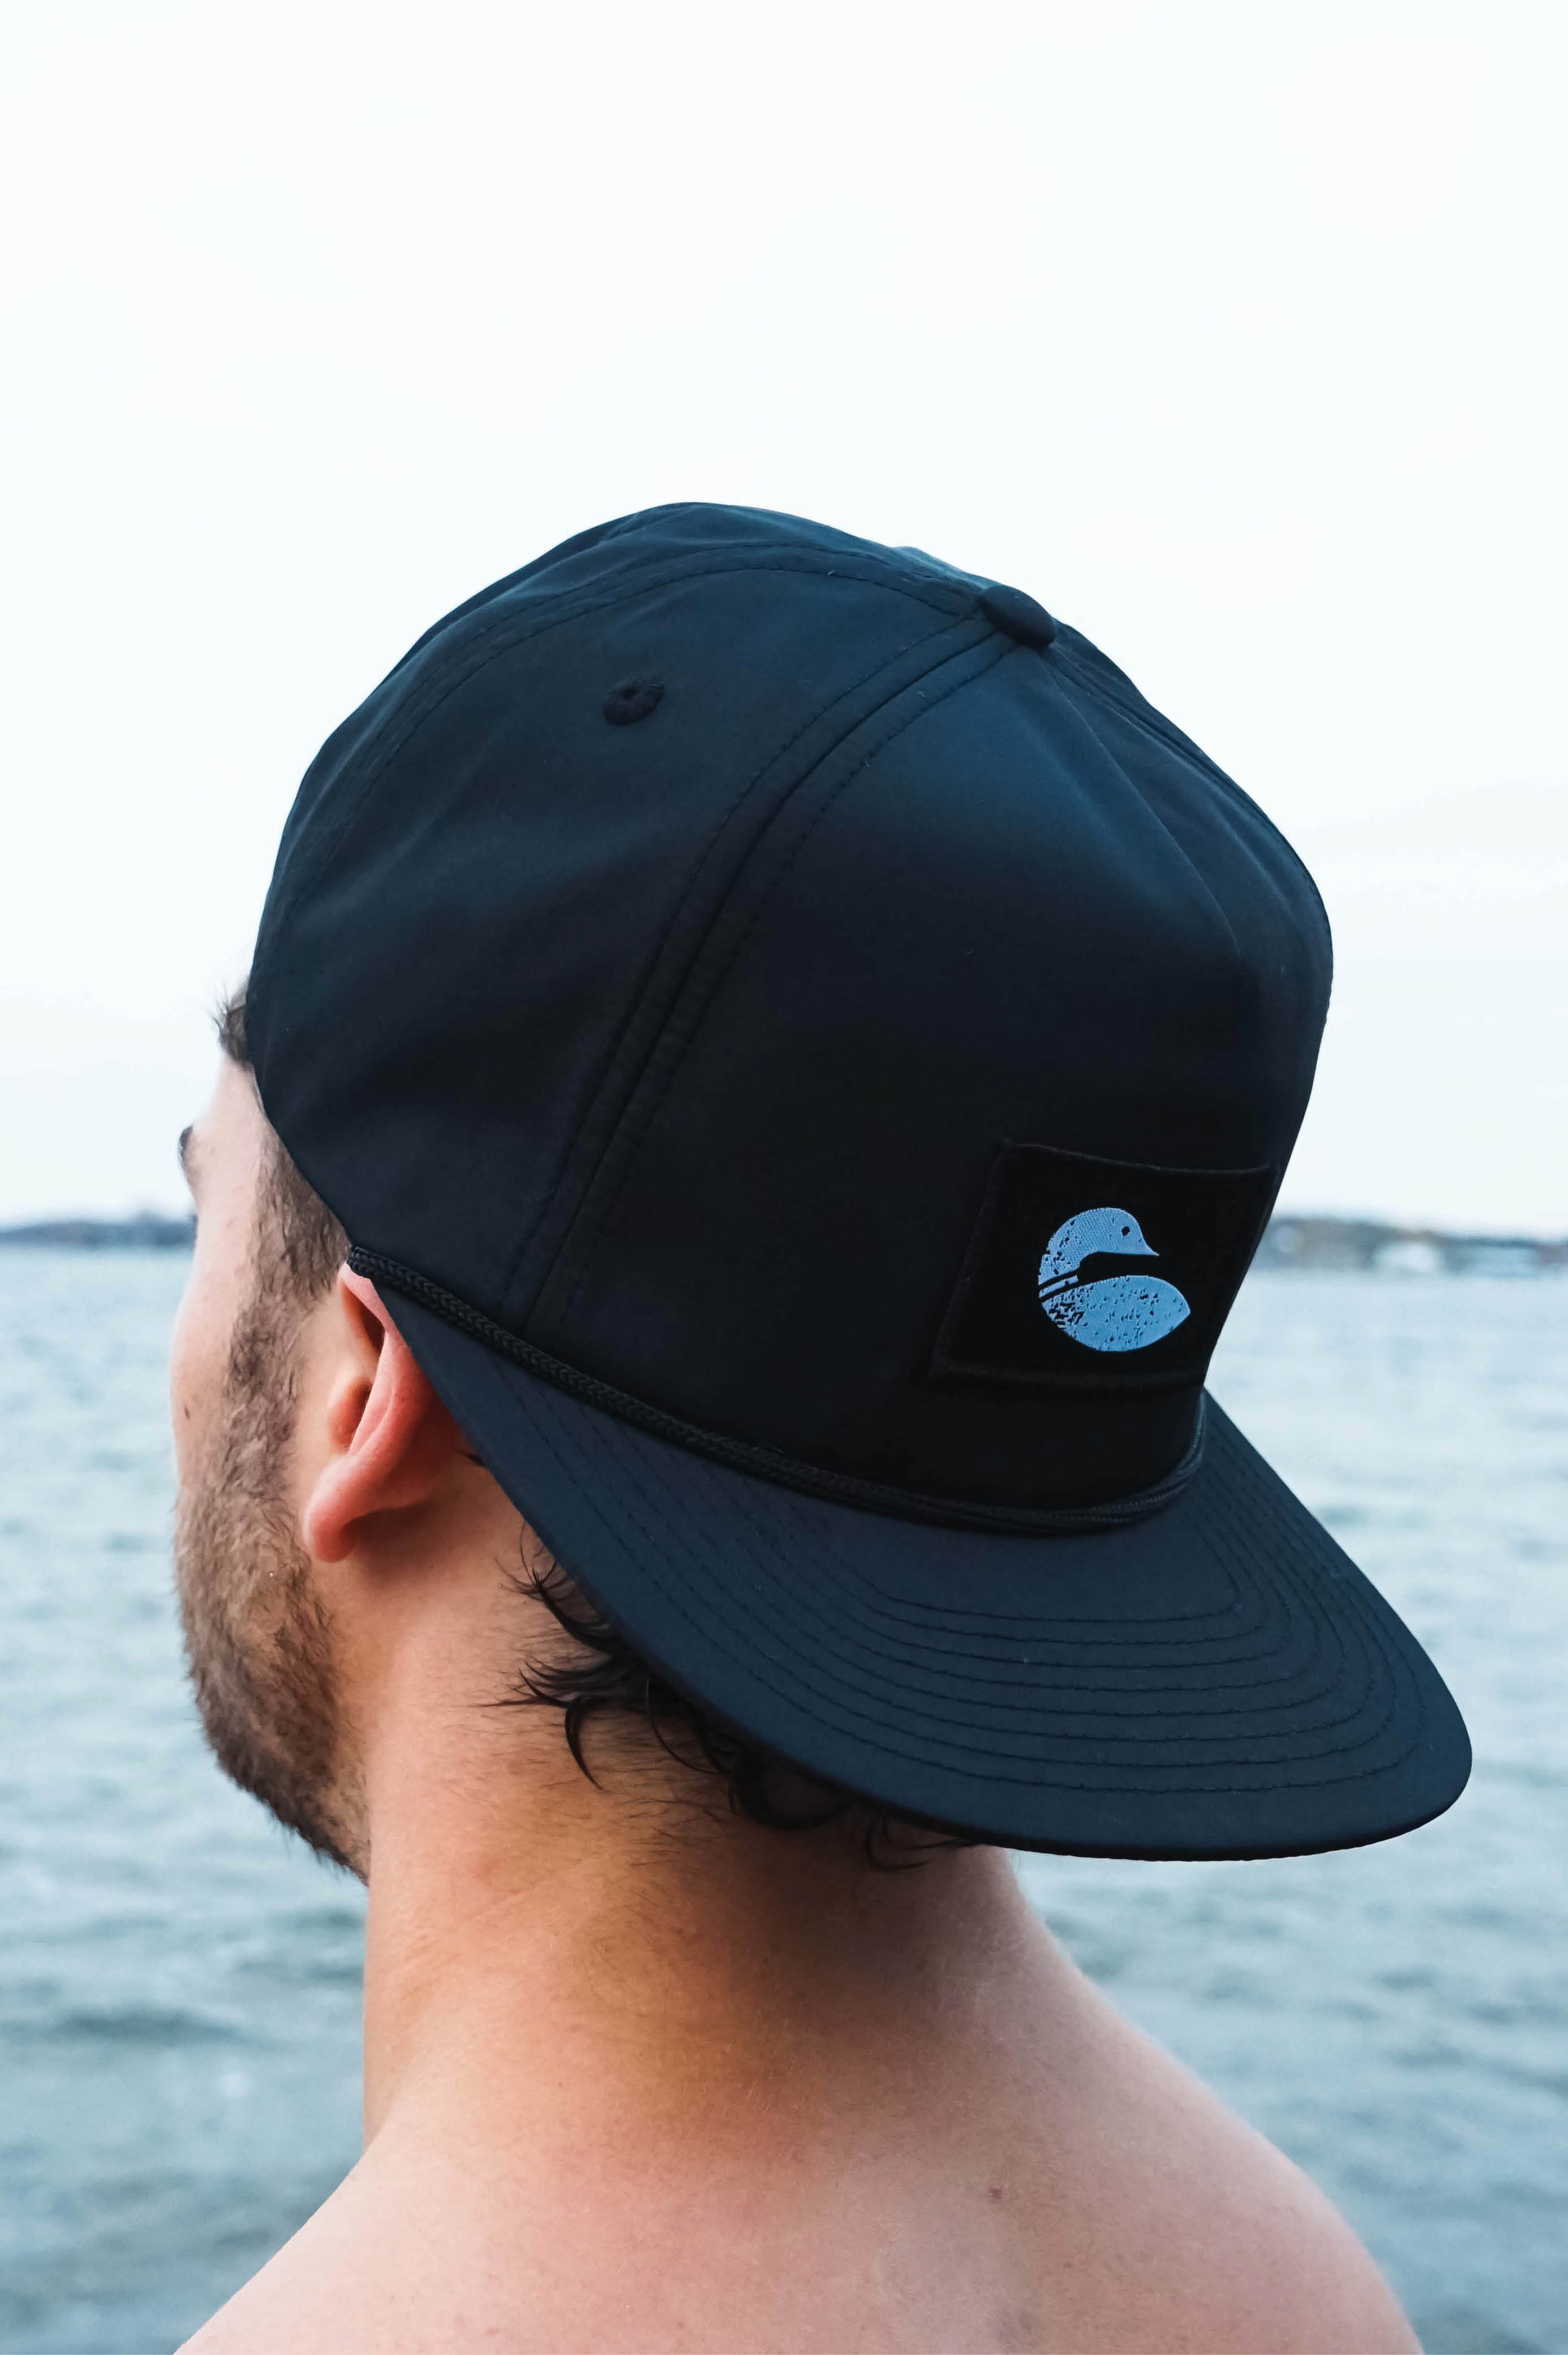 Buy Knotyy Caps for Men Unisex Mens Caps with Adjustable Strap in